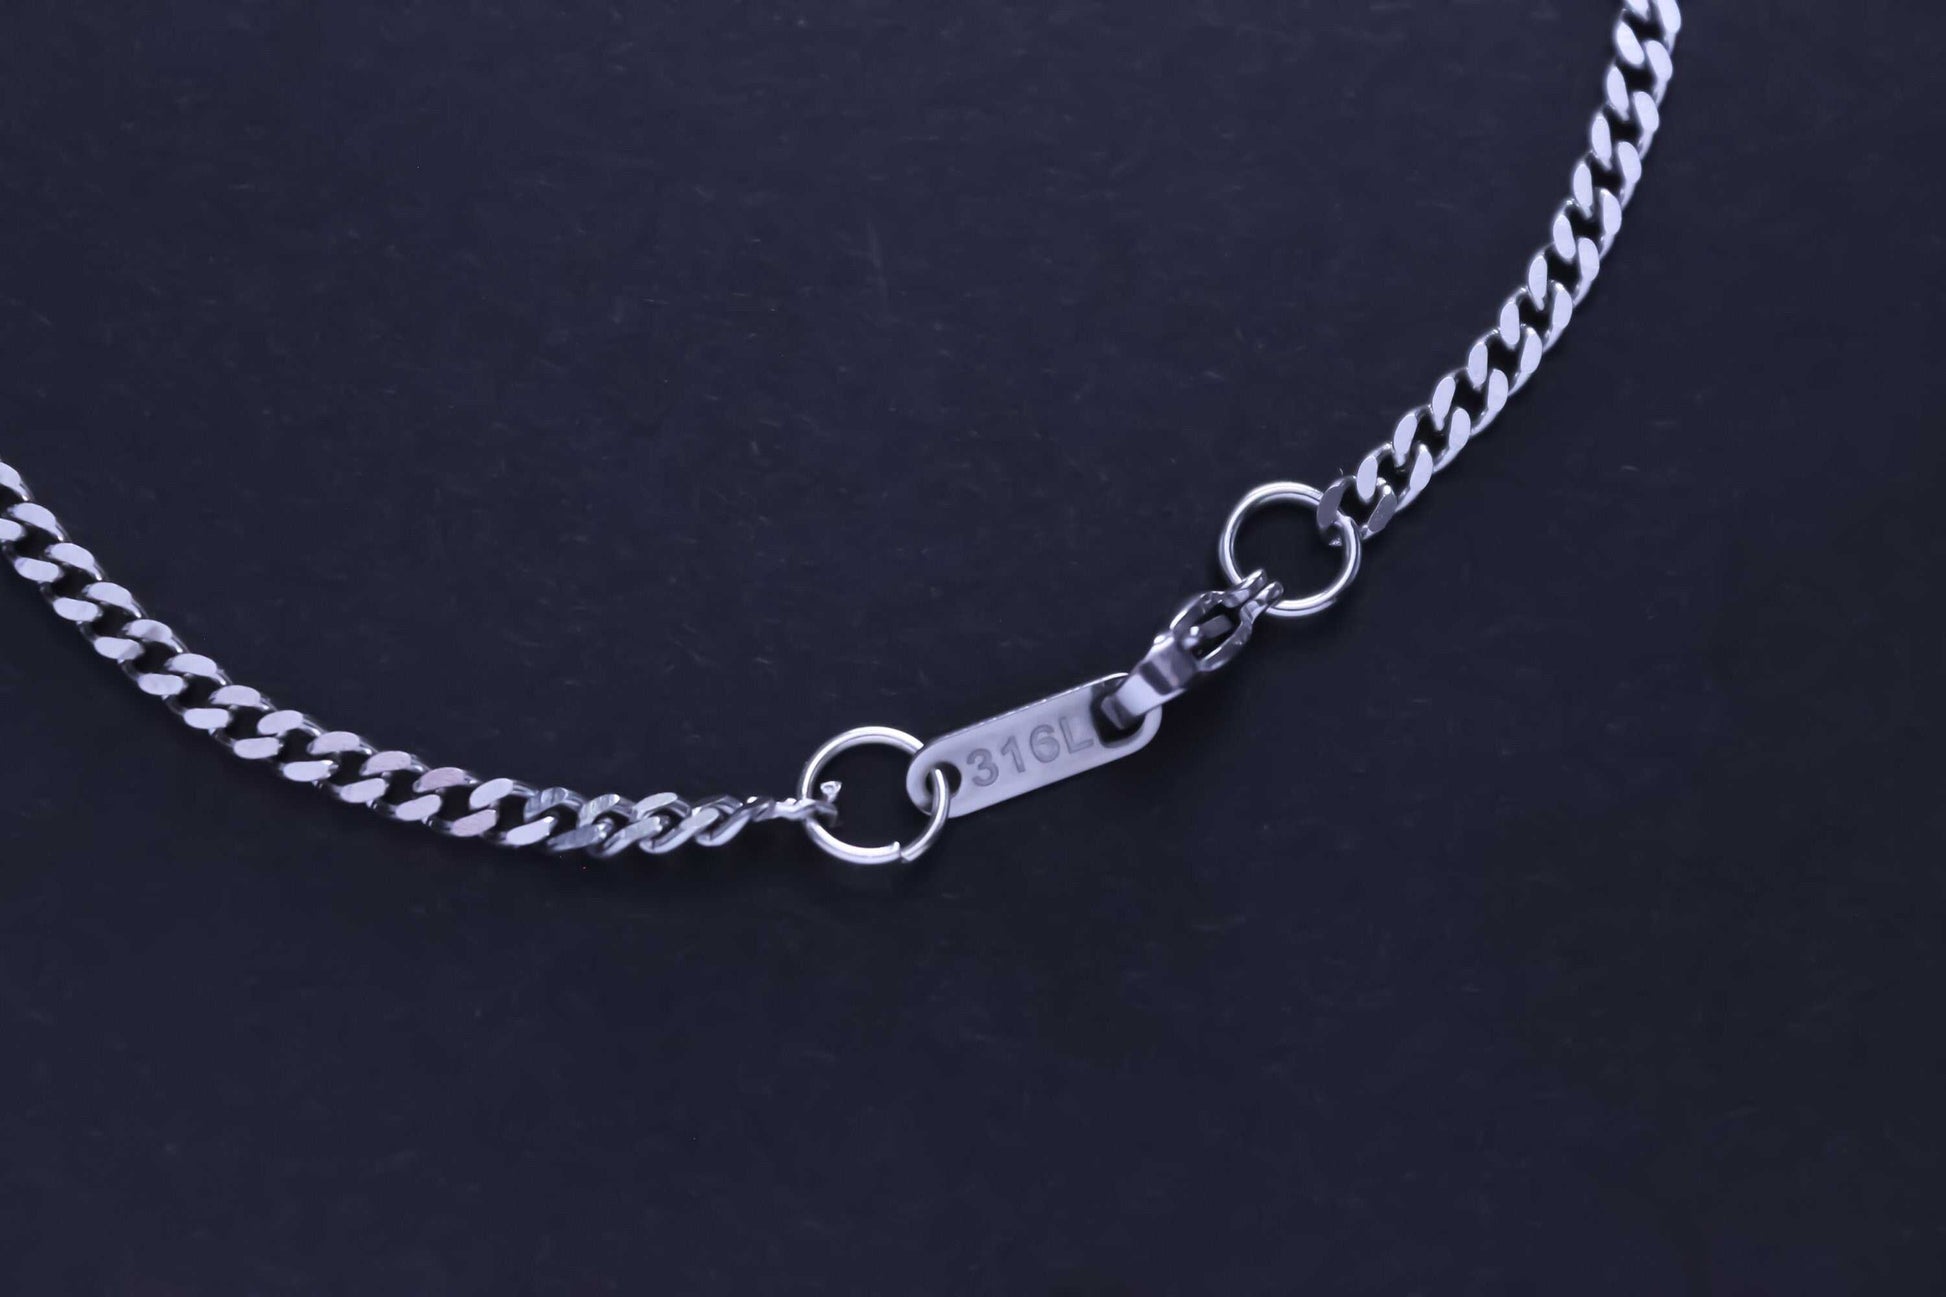 ETHERNAL SPIRAL NECKLACE - Necklace Stylish Silver Necklace - Necklaces for Women - Necklace for Men - Necklace with Pendant